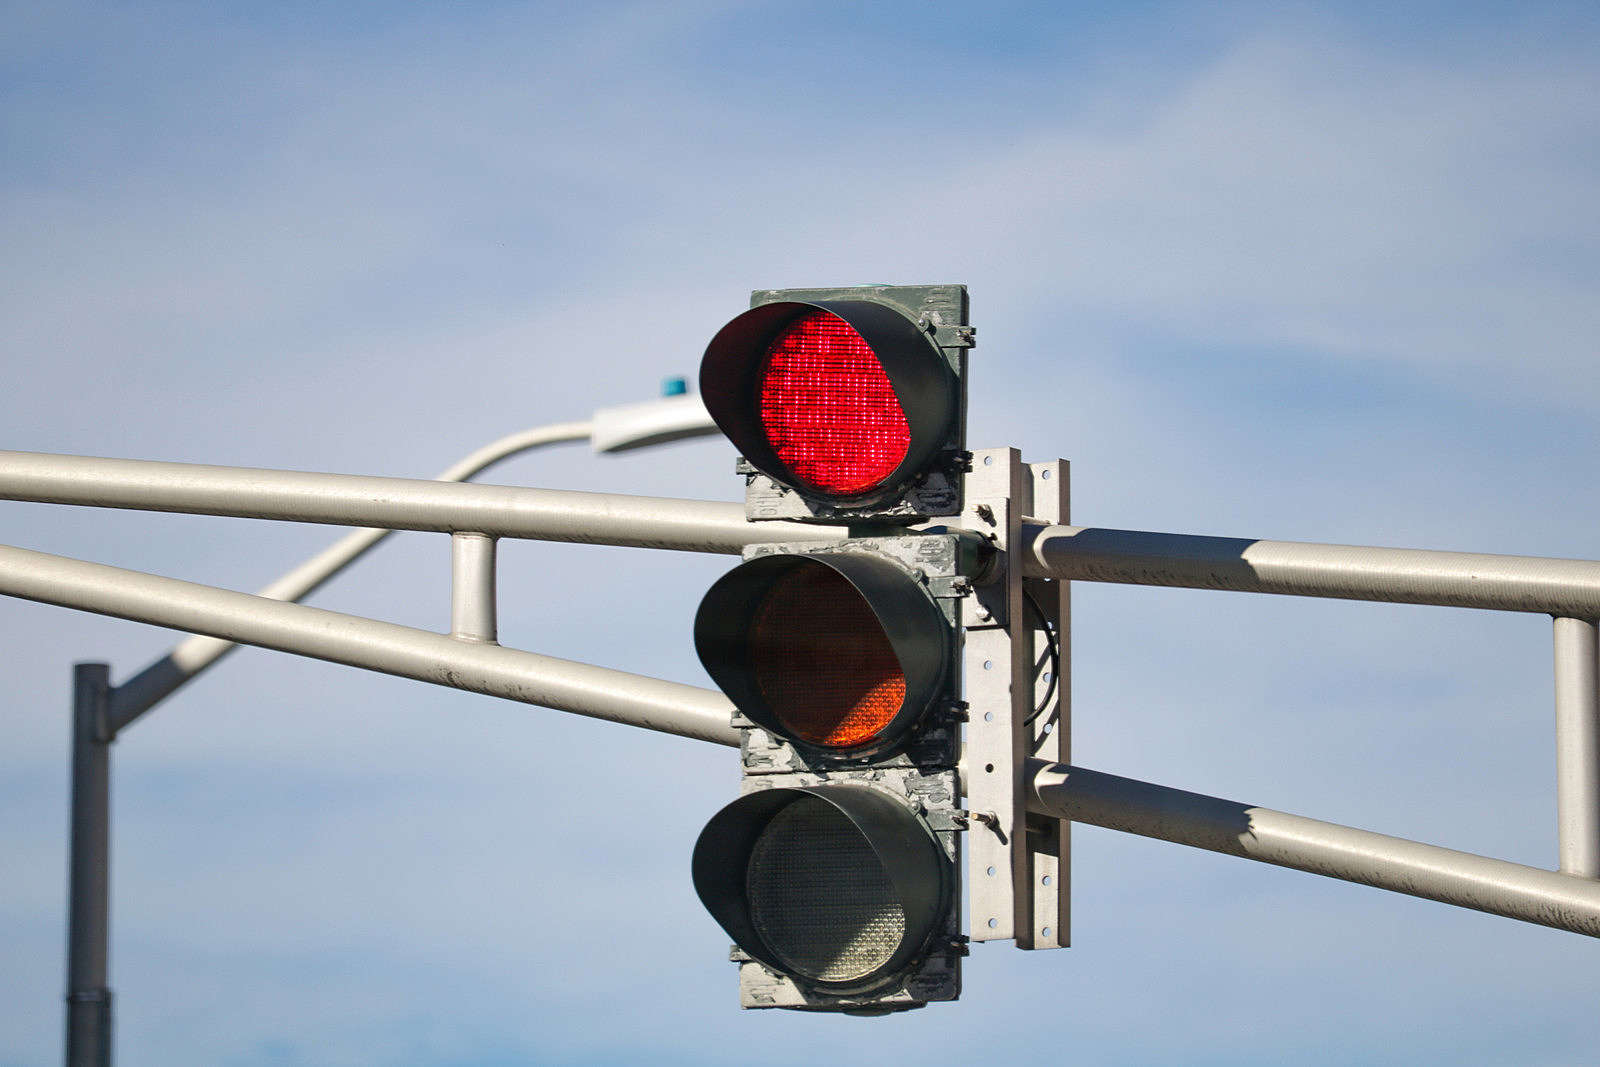 Some NJ drivers won't turn right on red... but why?